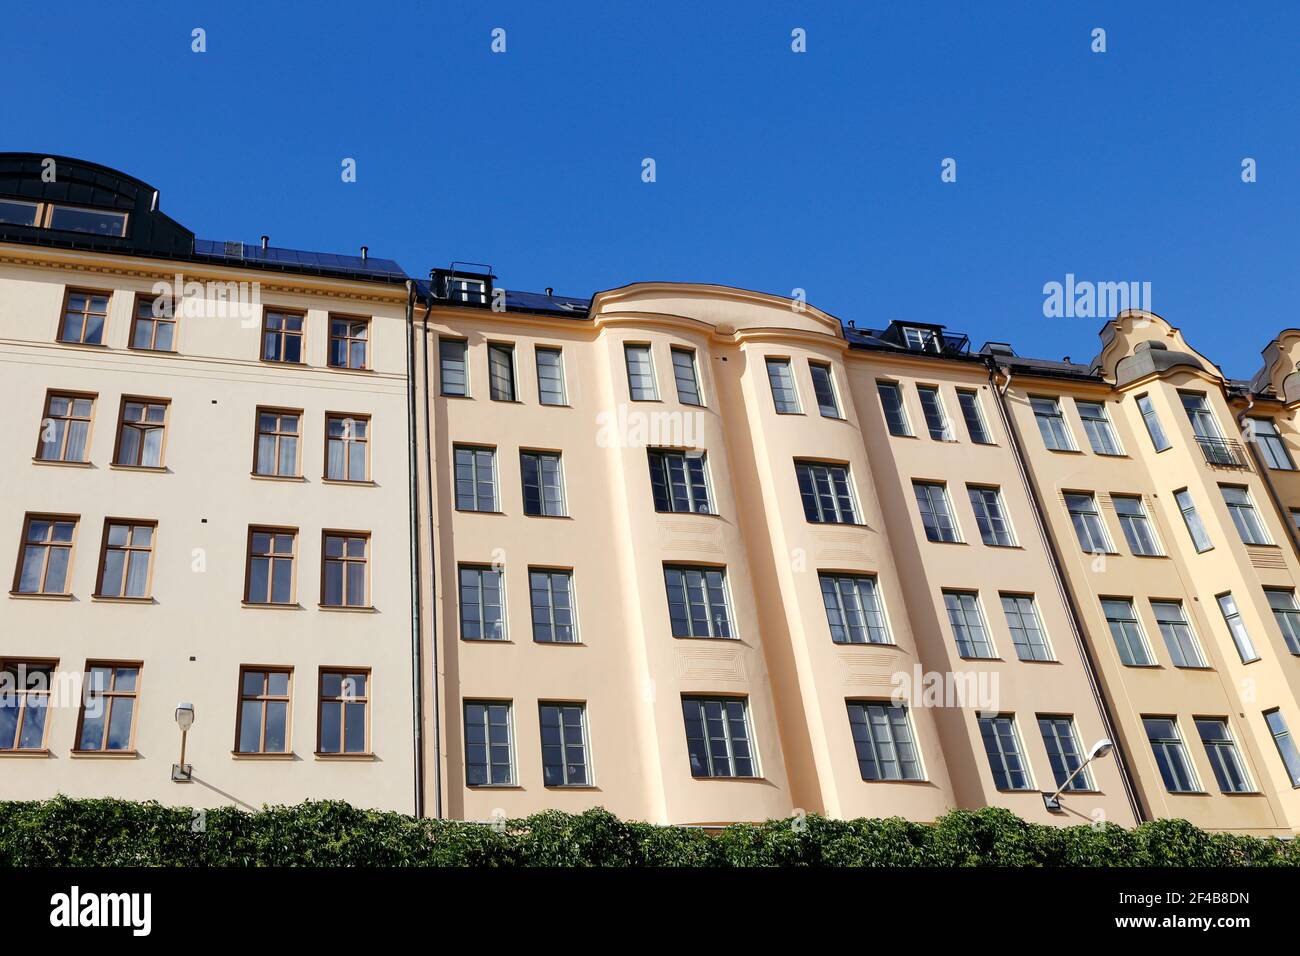 Low angle view of an old multi storey residential building. Stock Photo